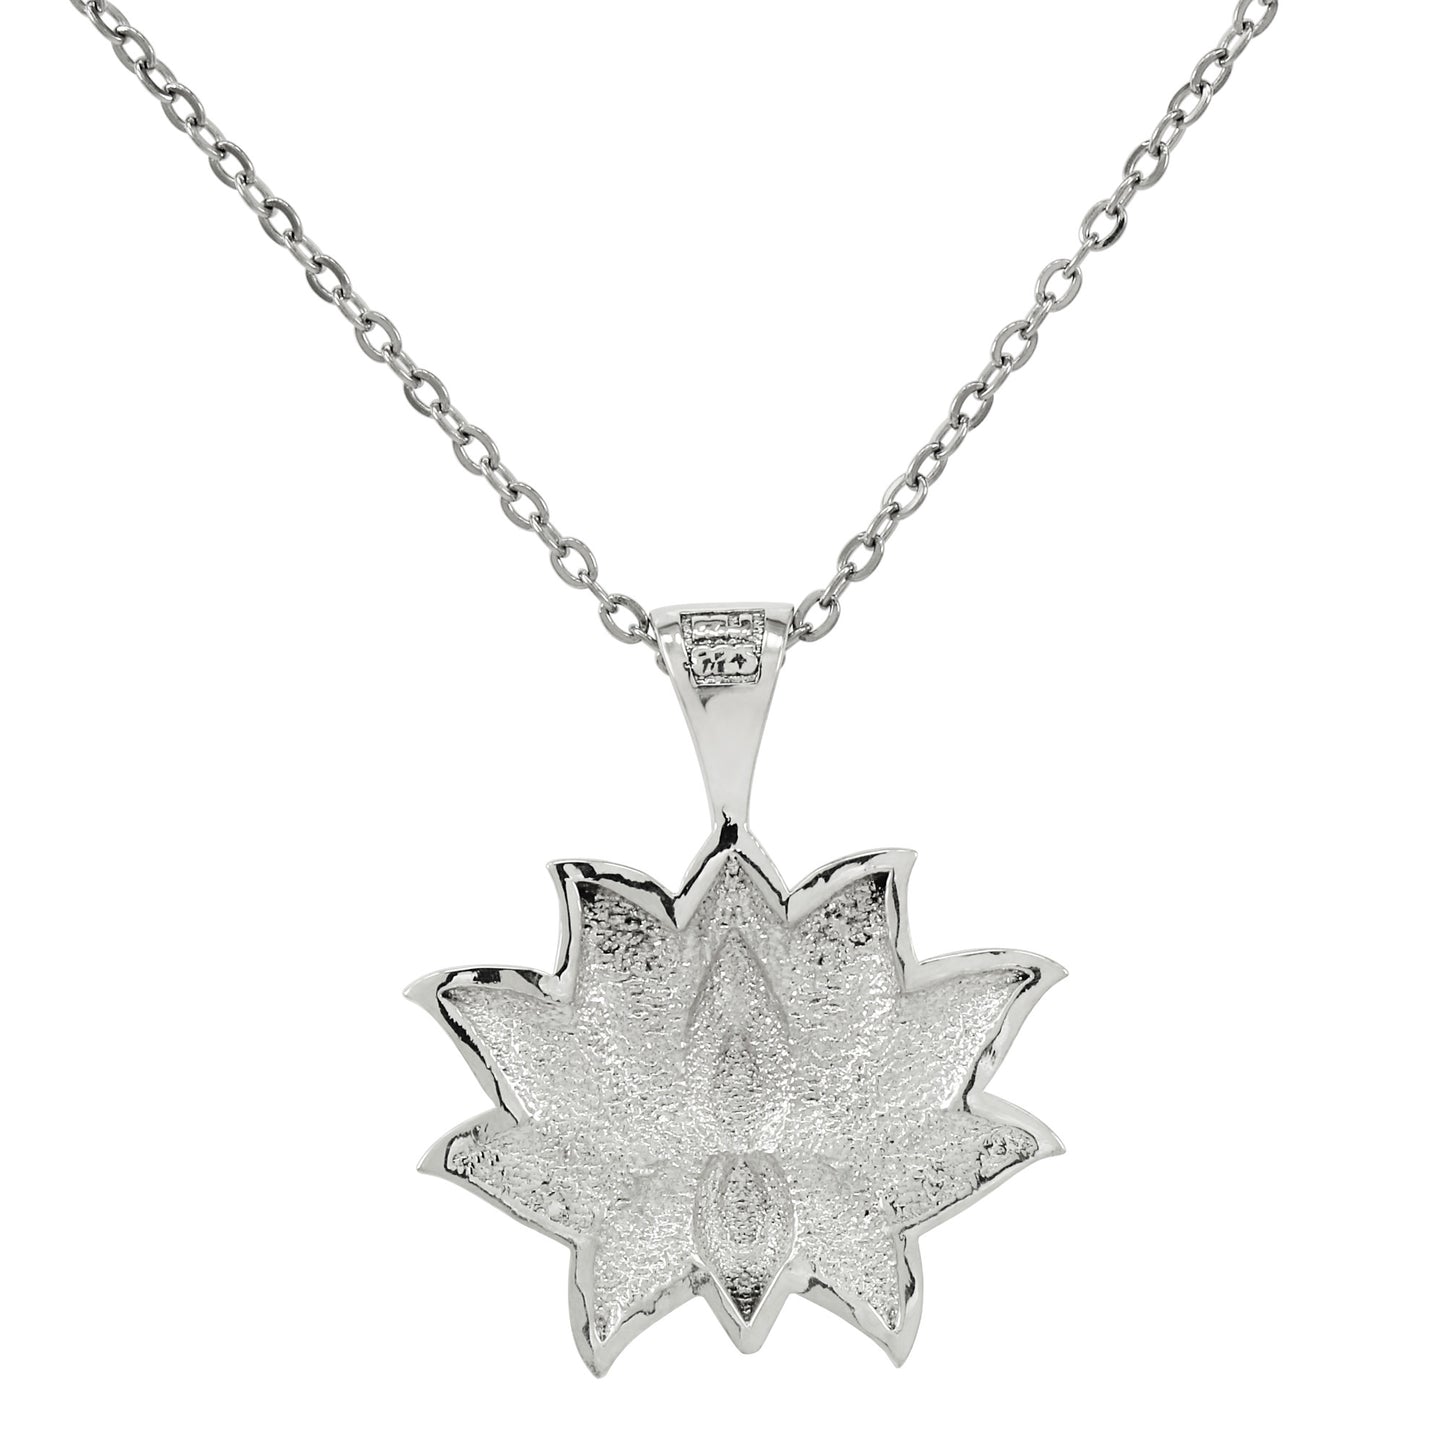 925 Sterling Silver Lotus Flower Pendant With With 22" Hypoallergenic Cable Chain Necklace